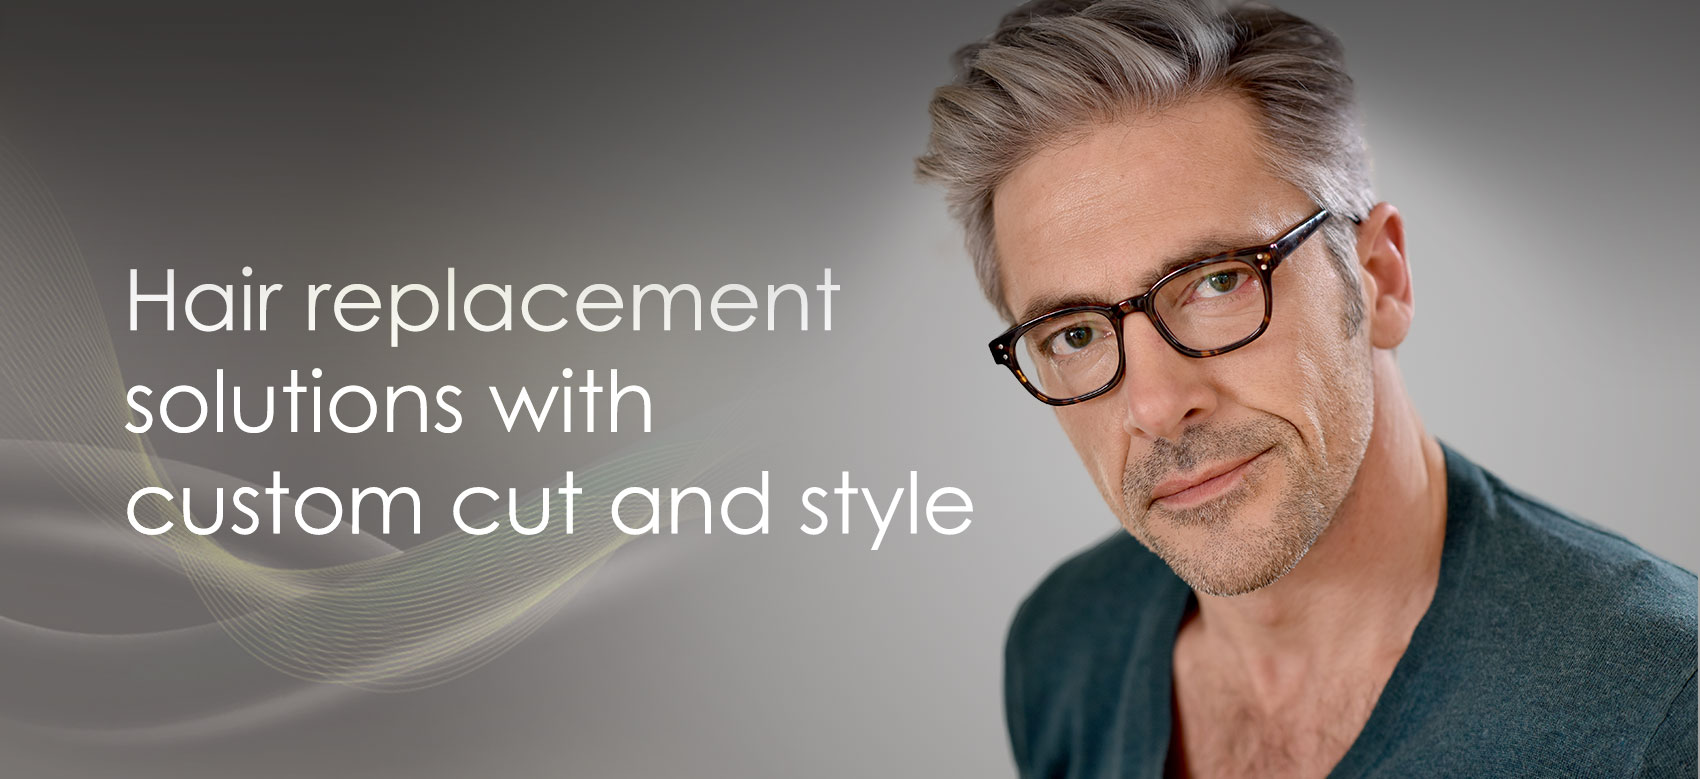 Hair replacement solutions with custom cut and style